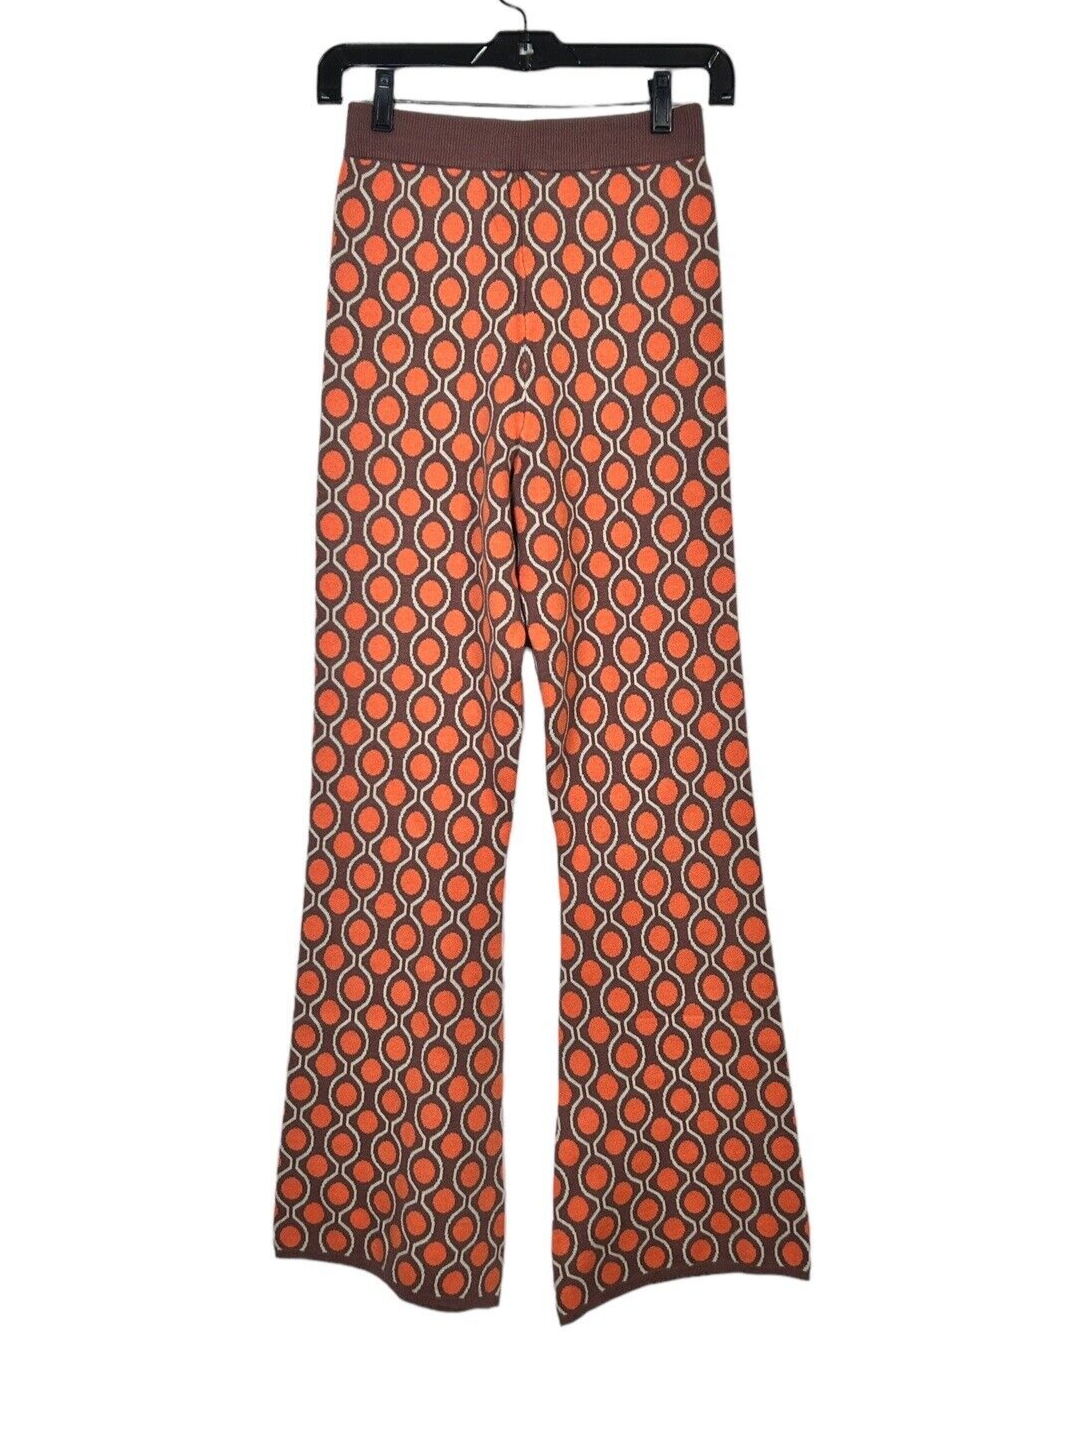 Primary image for Princess Polly Wide Leg Pants S/M Brown Orange High Rise Pull Up Avita Dots